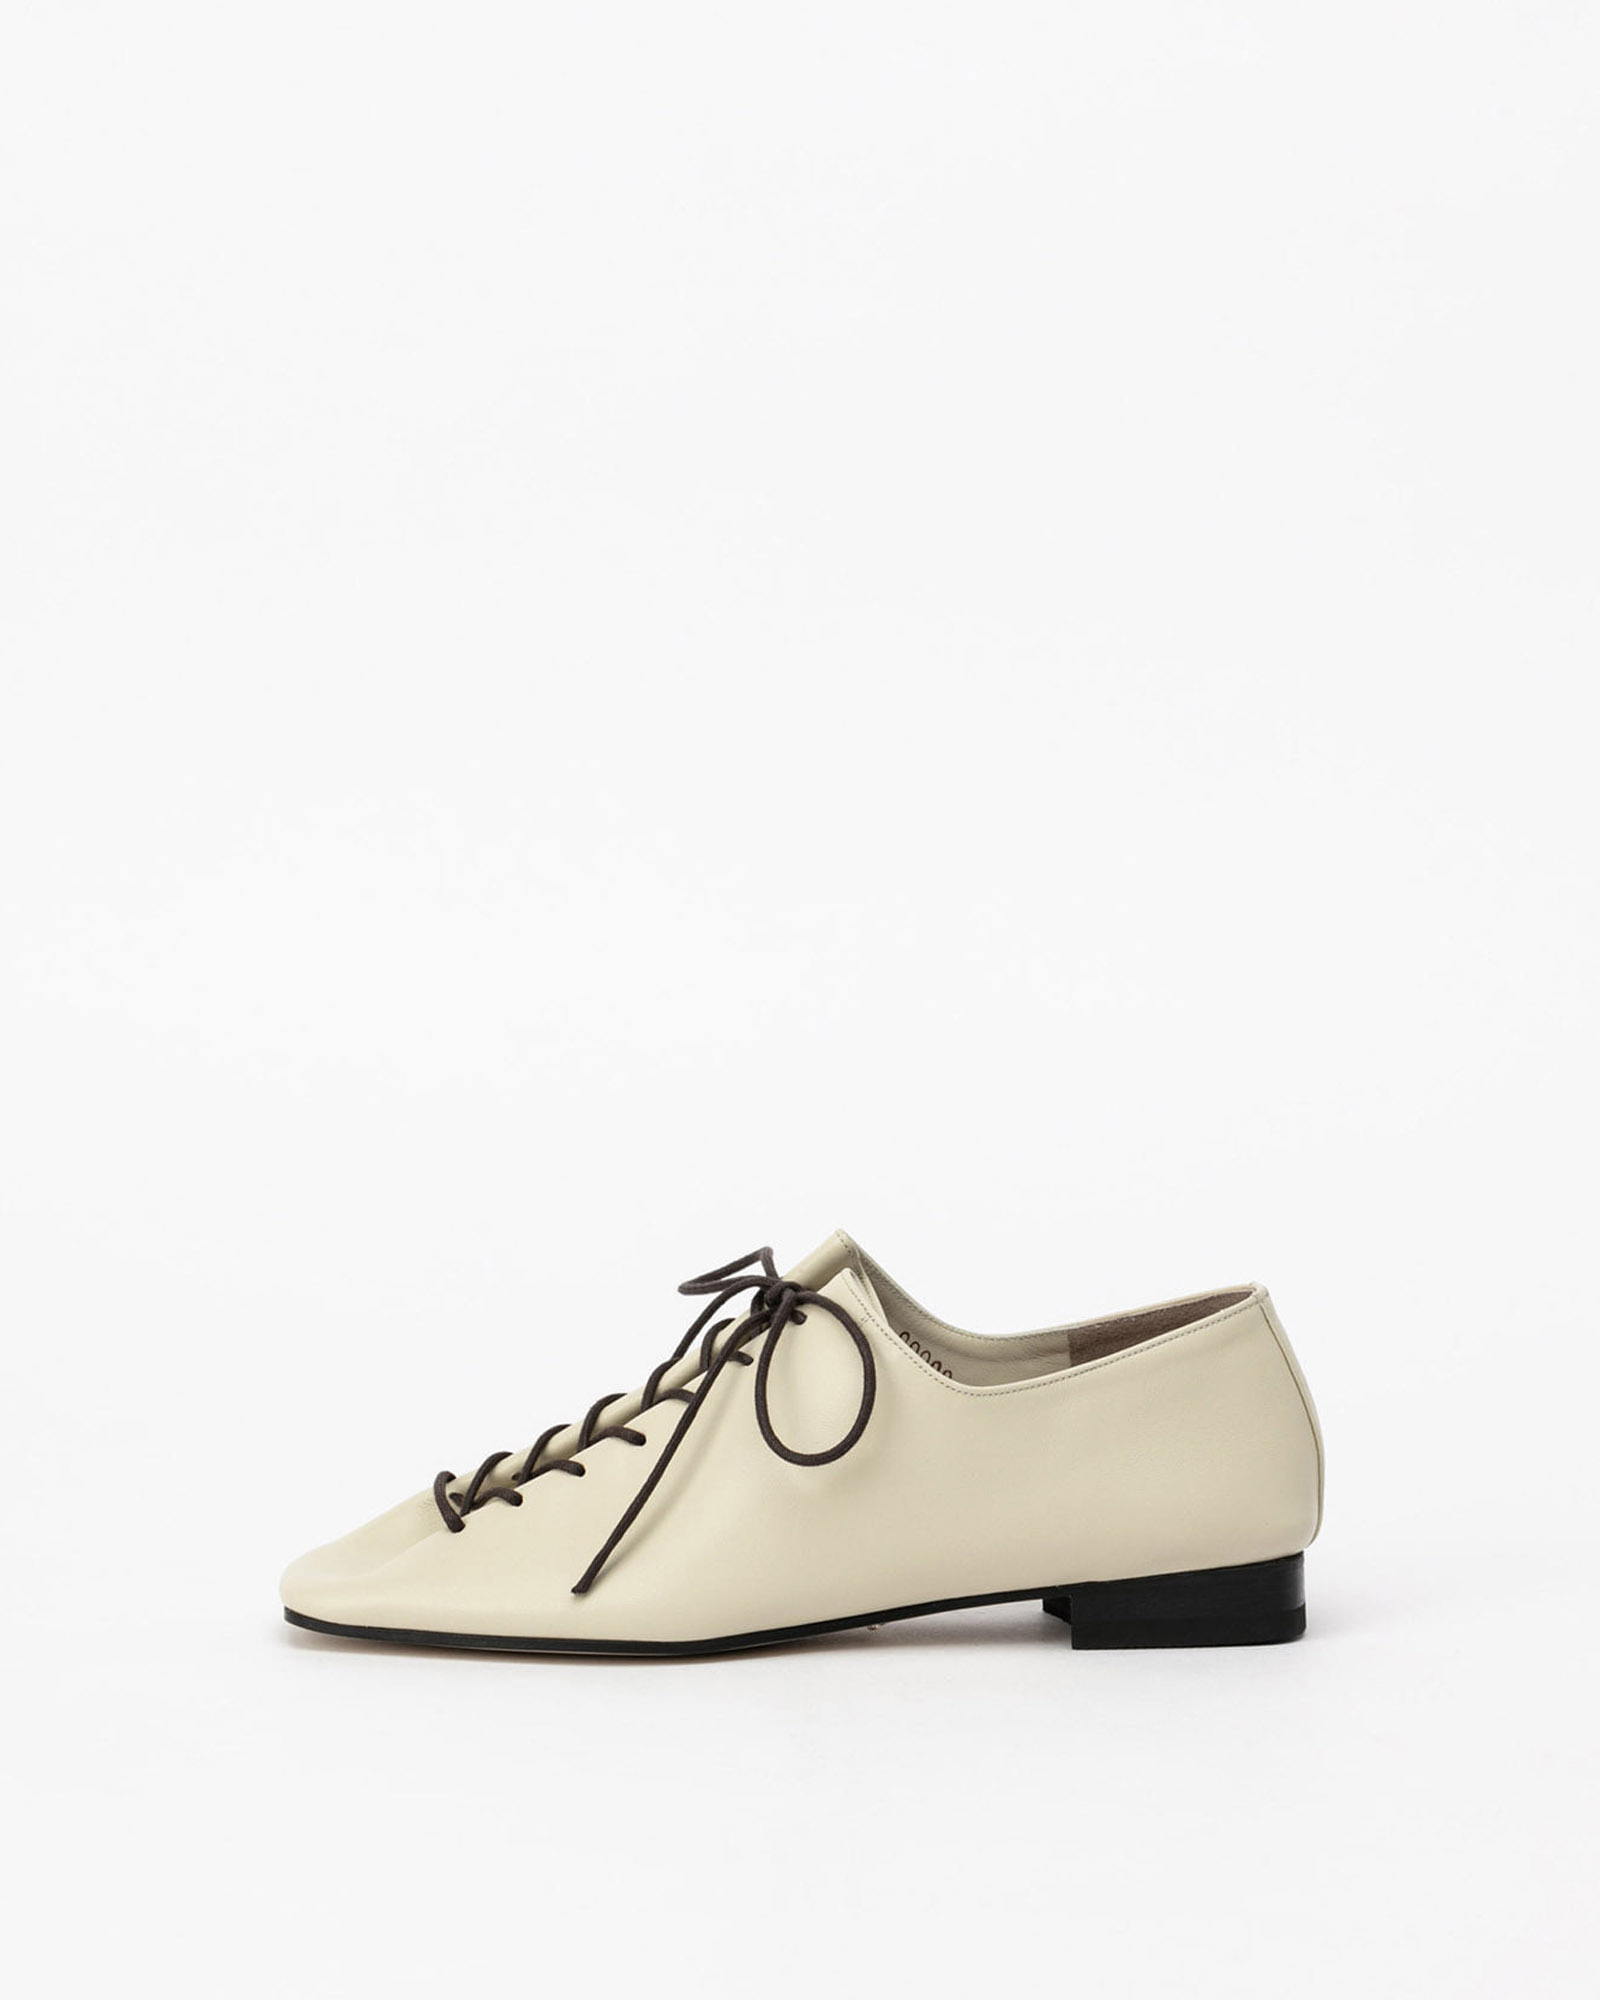 Banon Lace-up Flat Shoes in Ecru Ivory